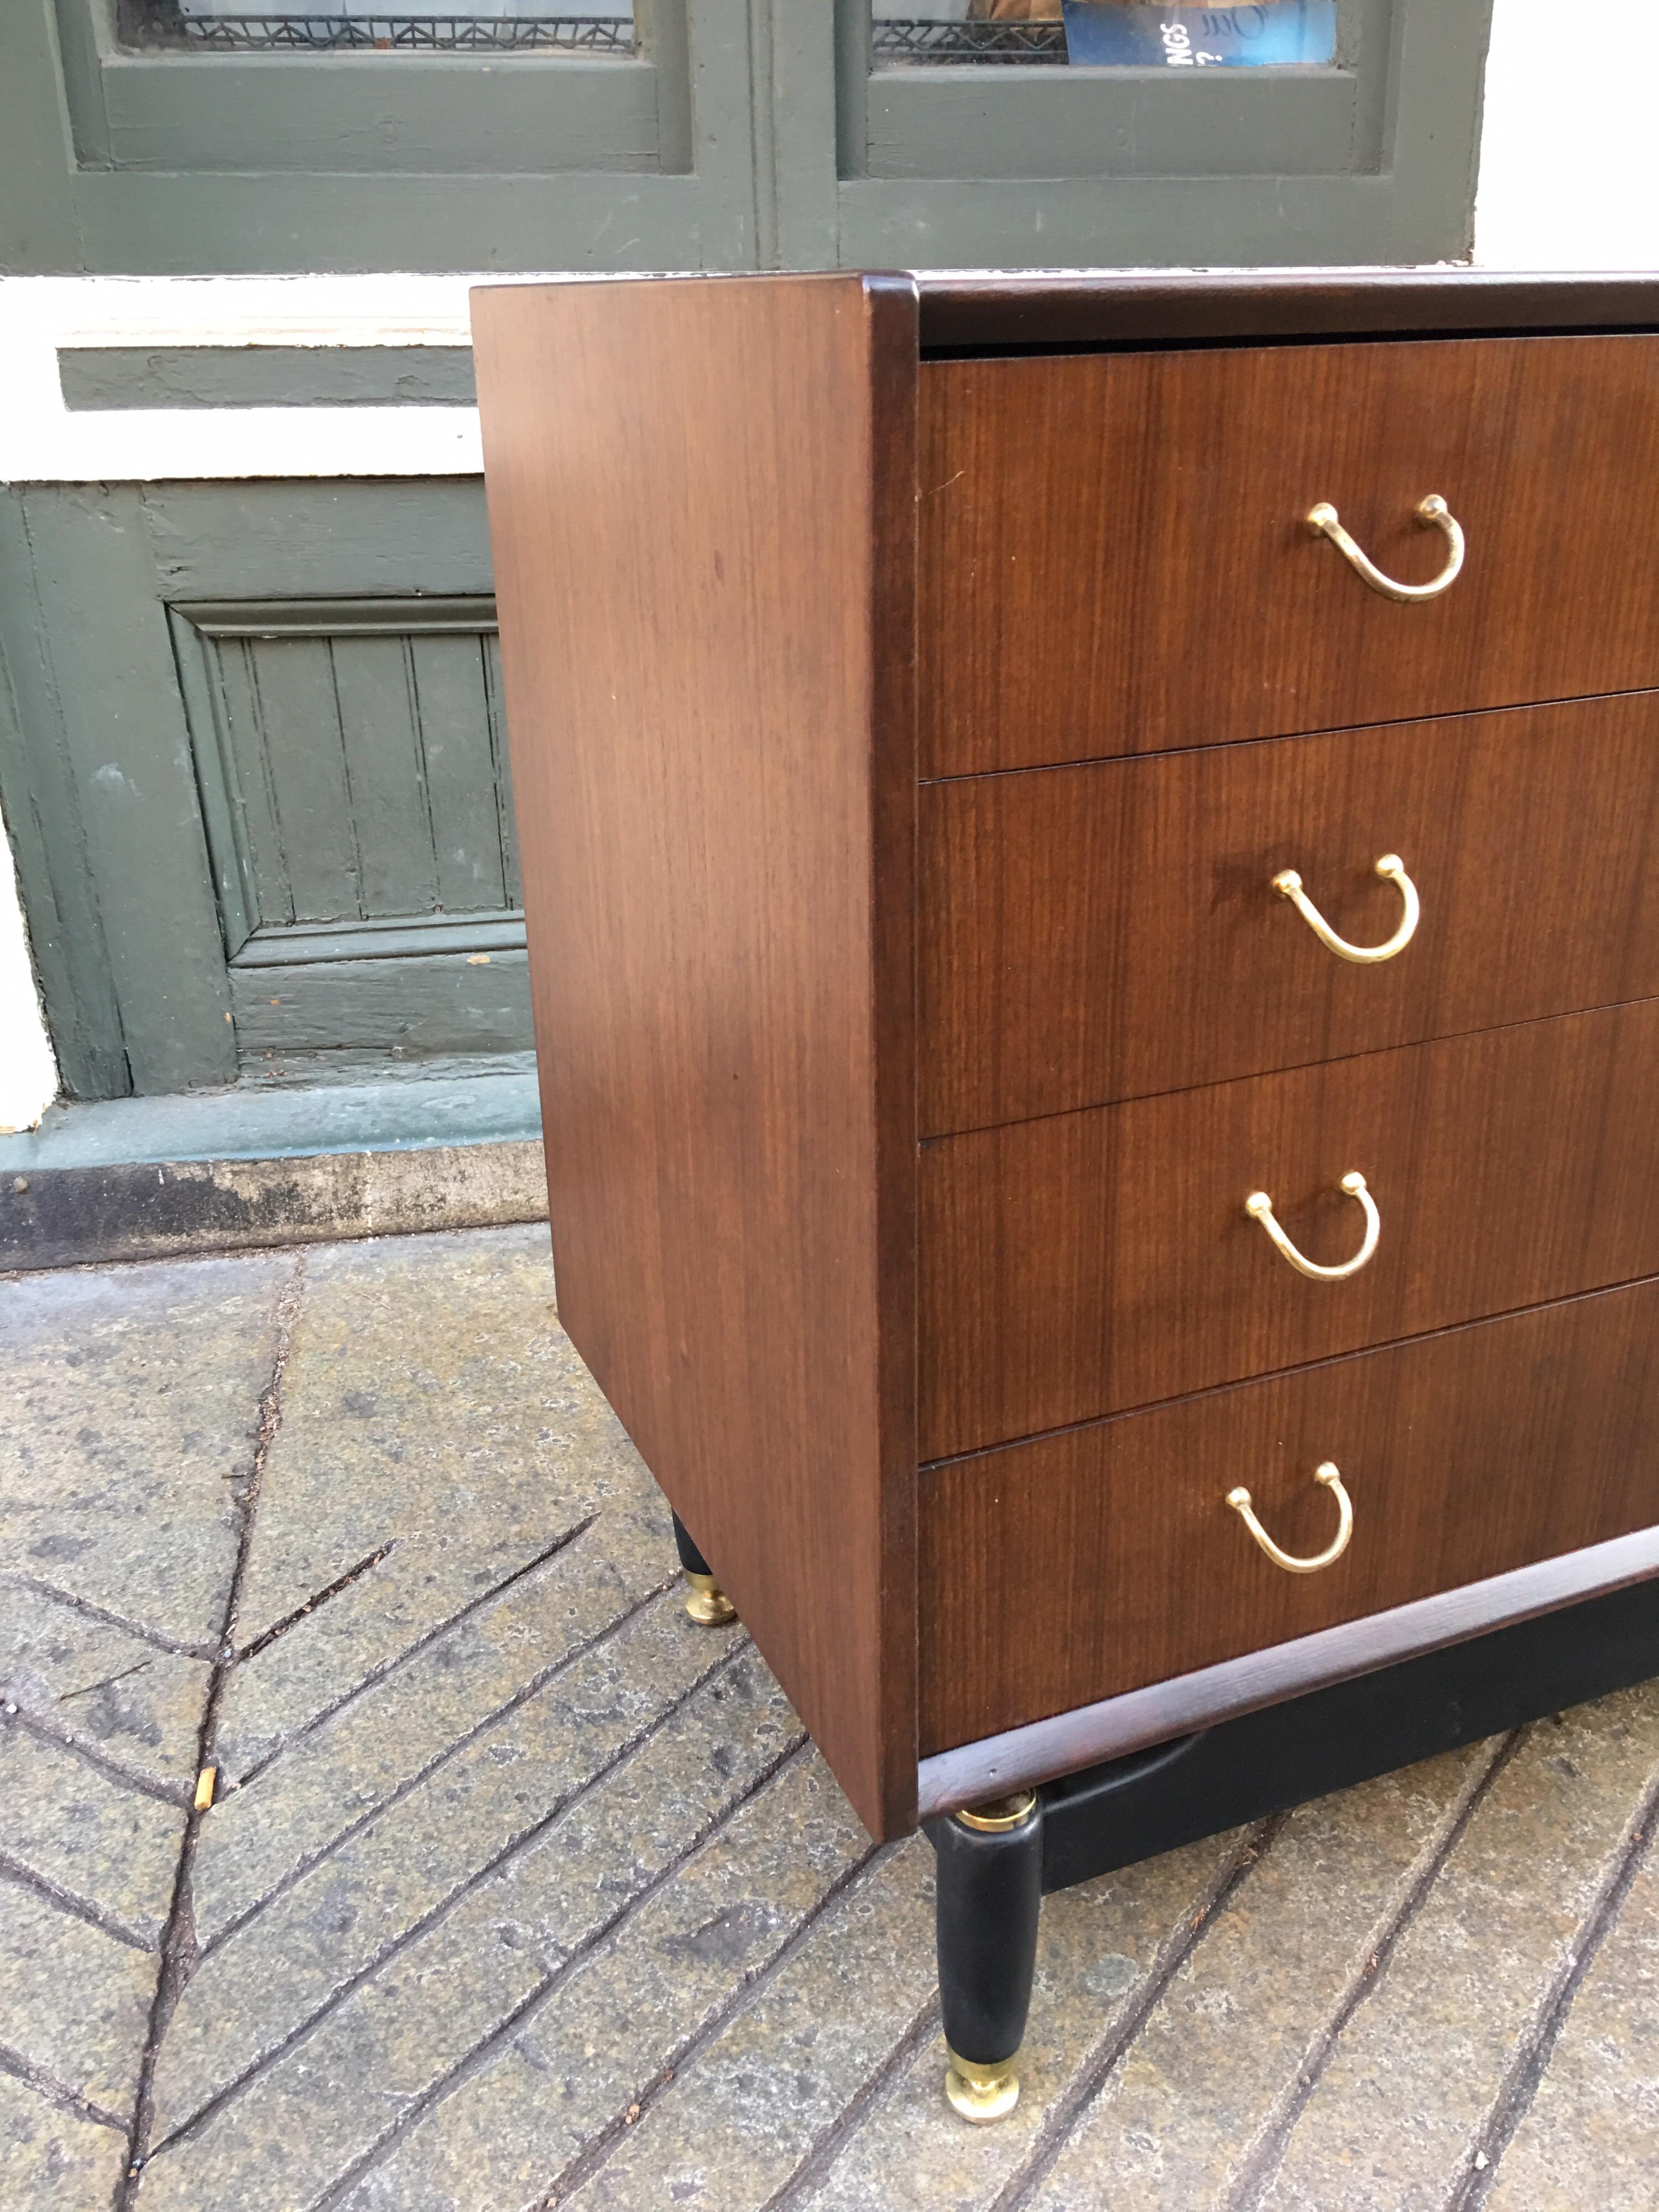 Grange 4-drawer French rosewood dresser. Brass U- shaped handles are unique and quite easy to grasp! Probably from the 1950s or early 1960s, looks like it was completely restored within the last few years. Beautiful Rosewood Body on an elevated and